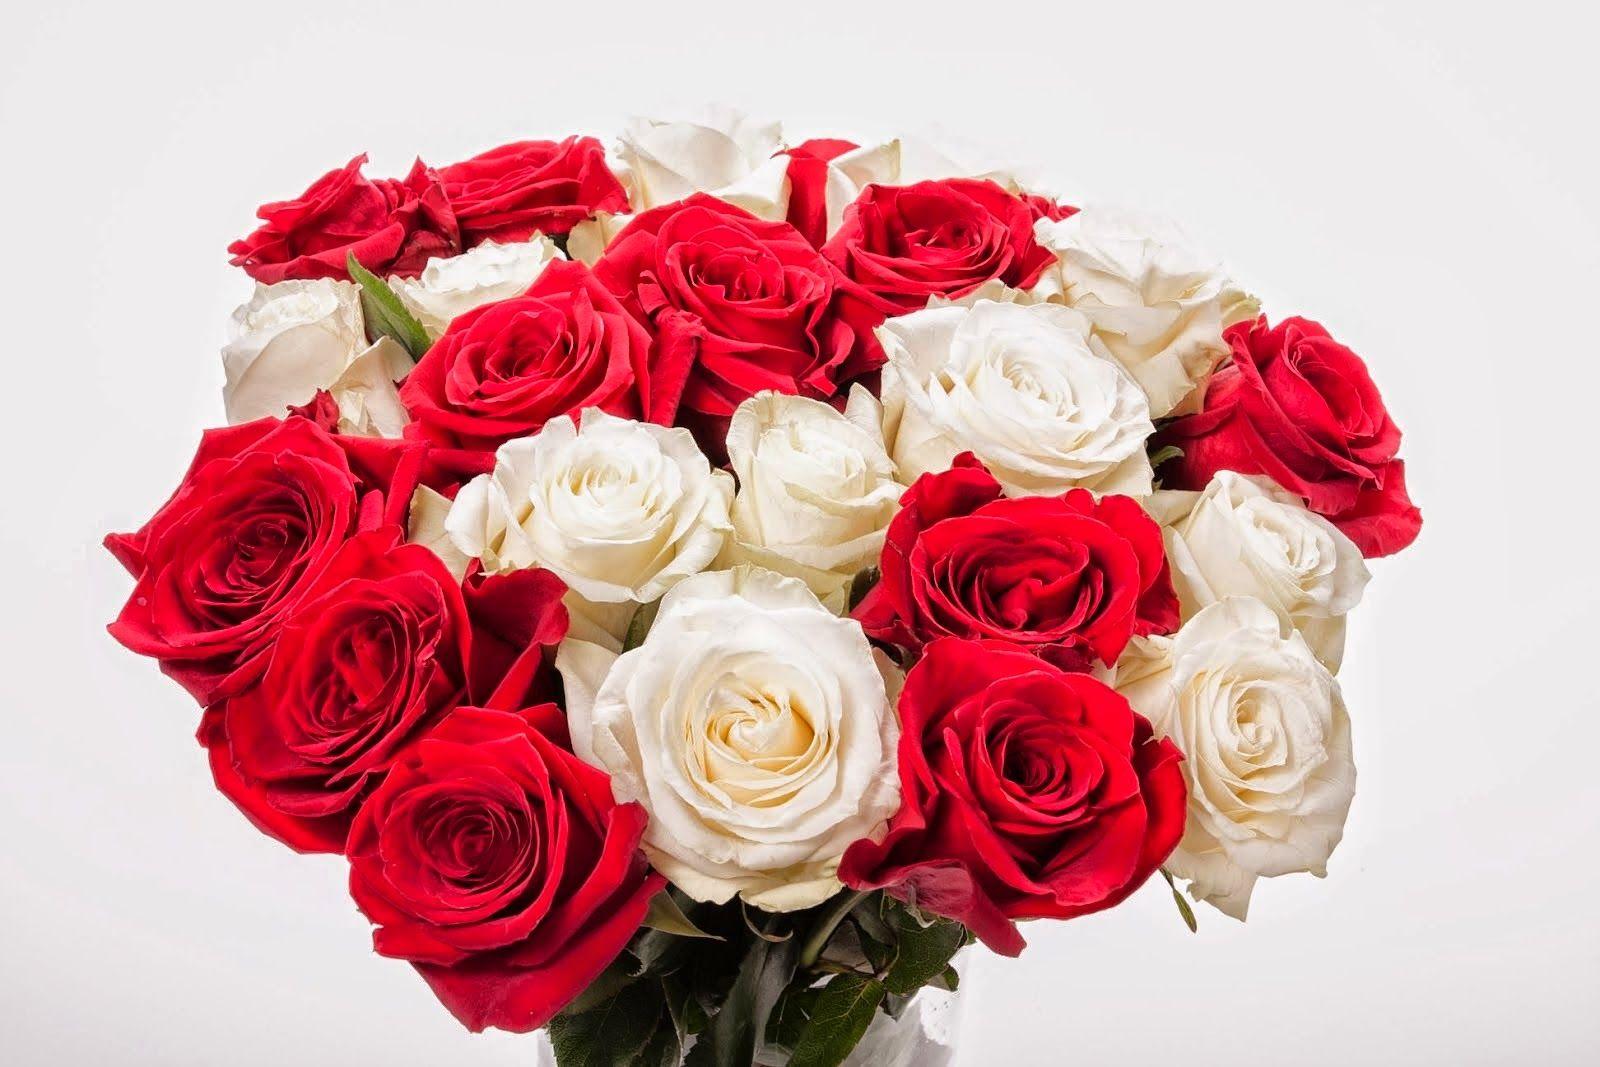 happy rose day wallpapers image pictures photos 2015